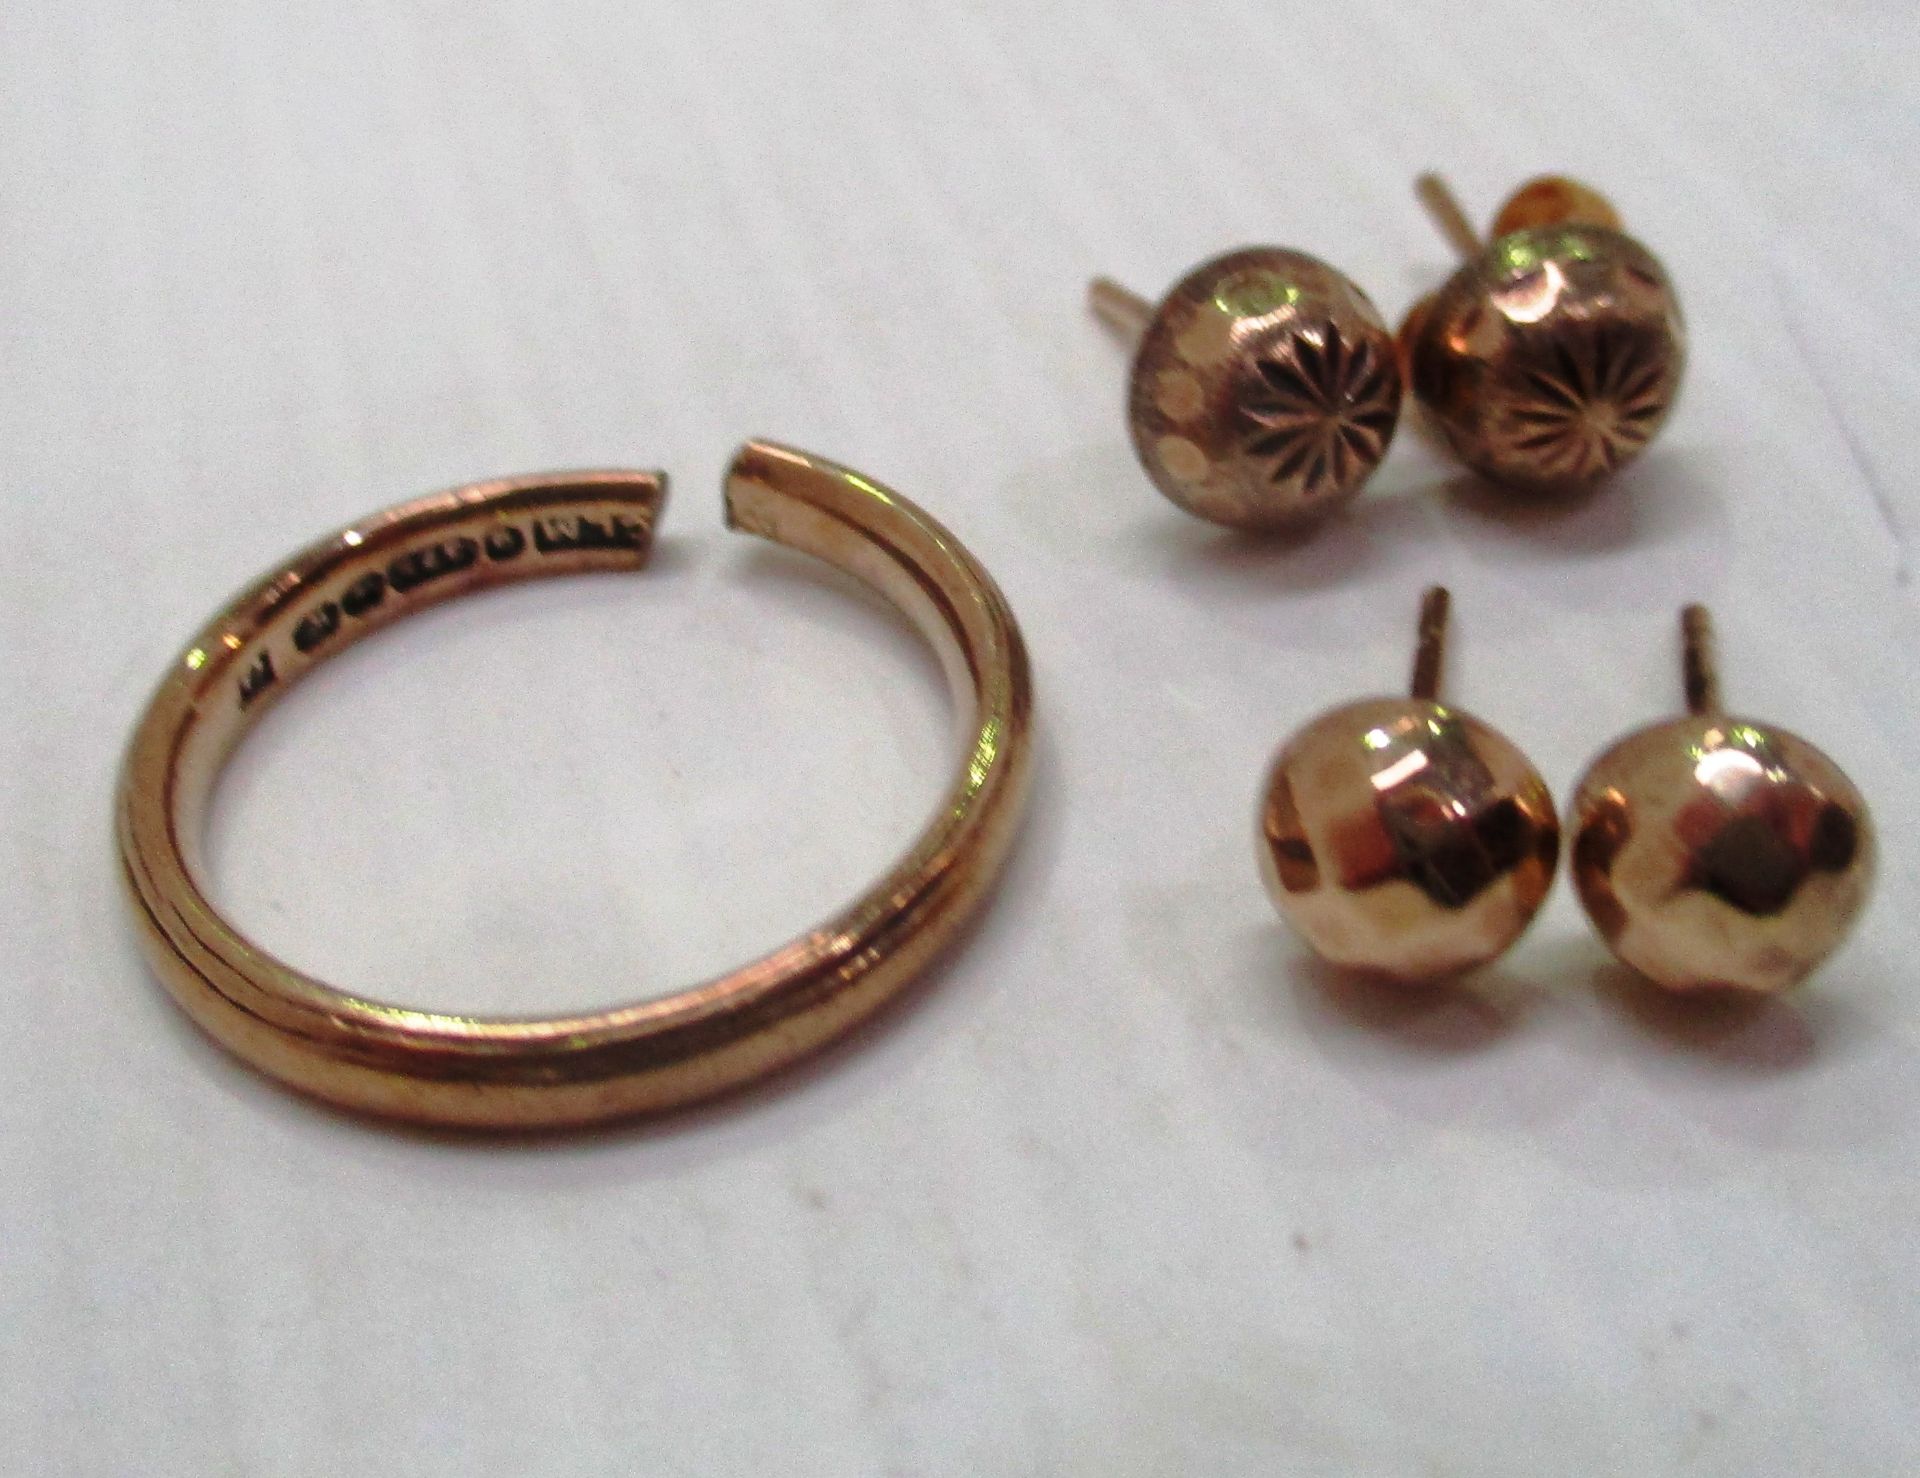 A 9ct gold wedding band (as seen) and two pairs of 9ct gold earrings (total approx weight 3.